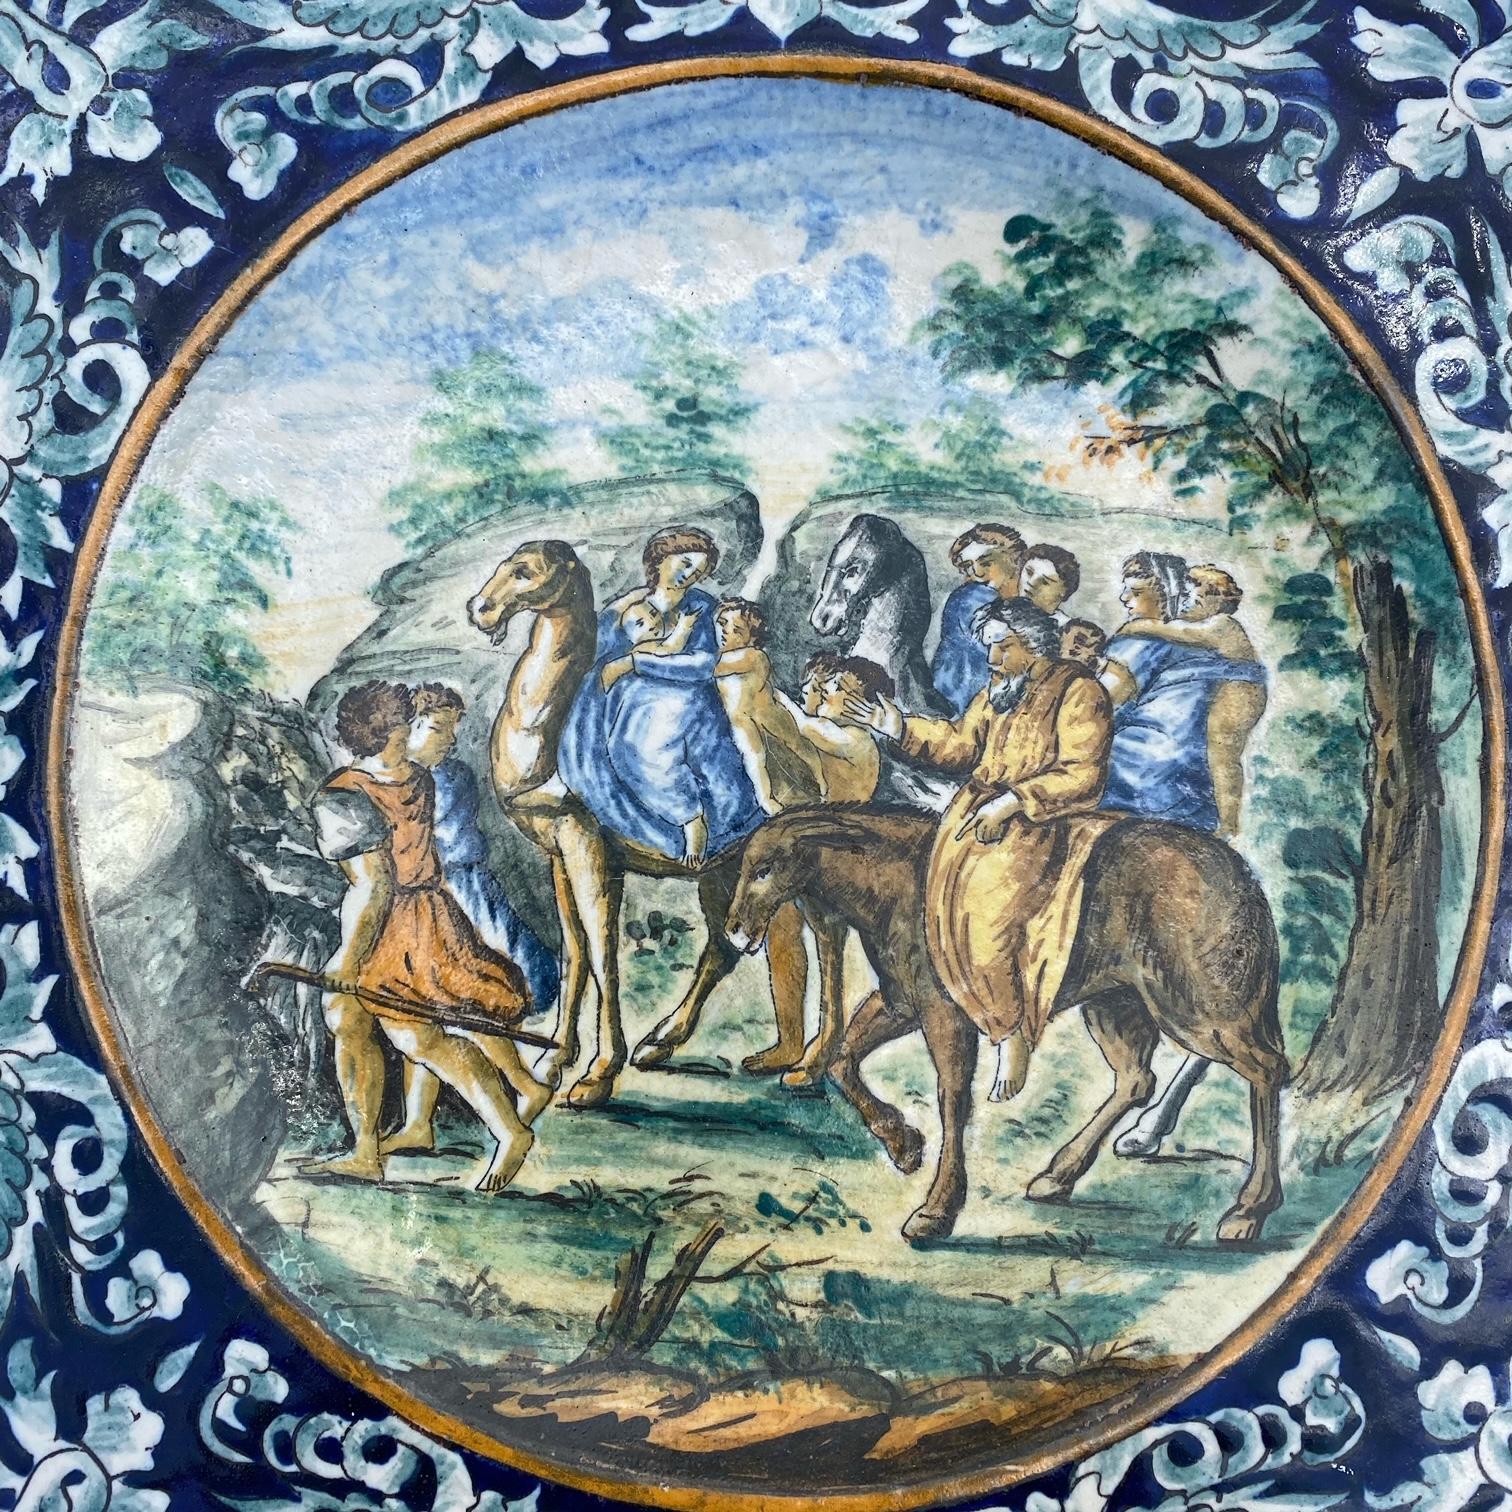 Very impressive large hand painted Italian Majolica plate made of tin glazed earthenware from the early 1800s. The biblical scene shows possibly the Virgin Mary (or another noblewoman and baby) and baby Jesus on horseback with other villagers and